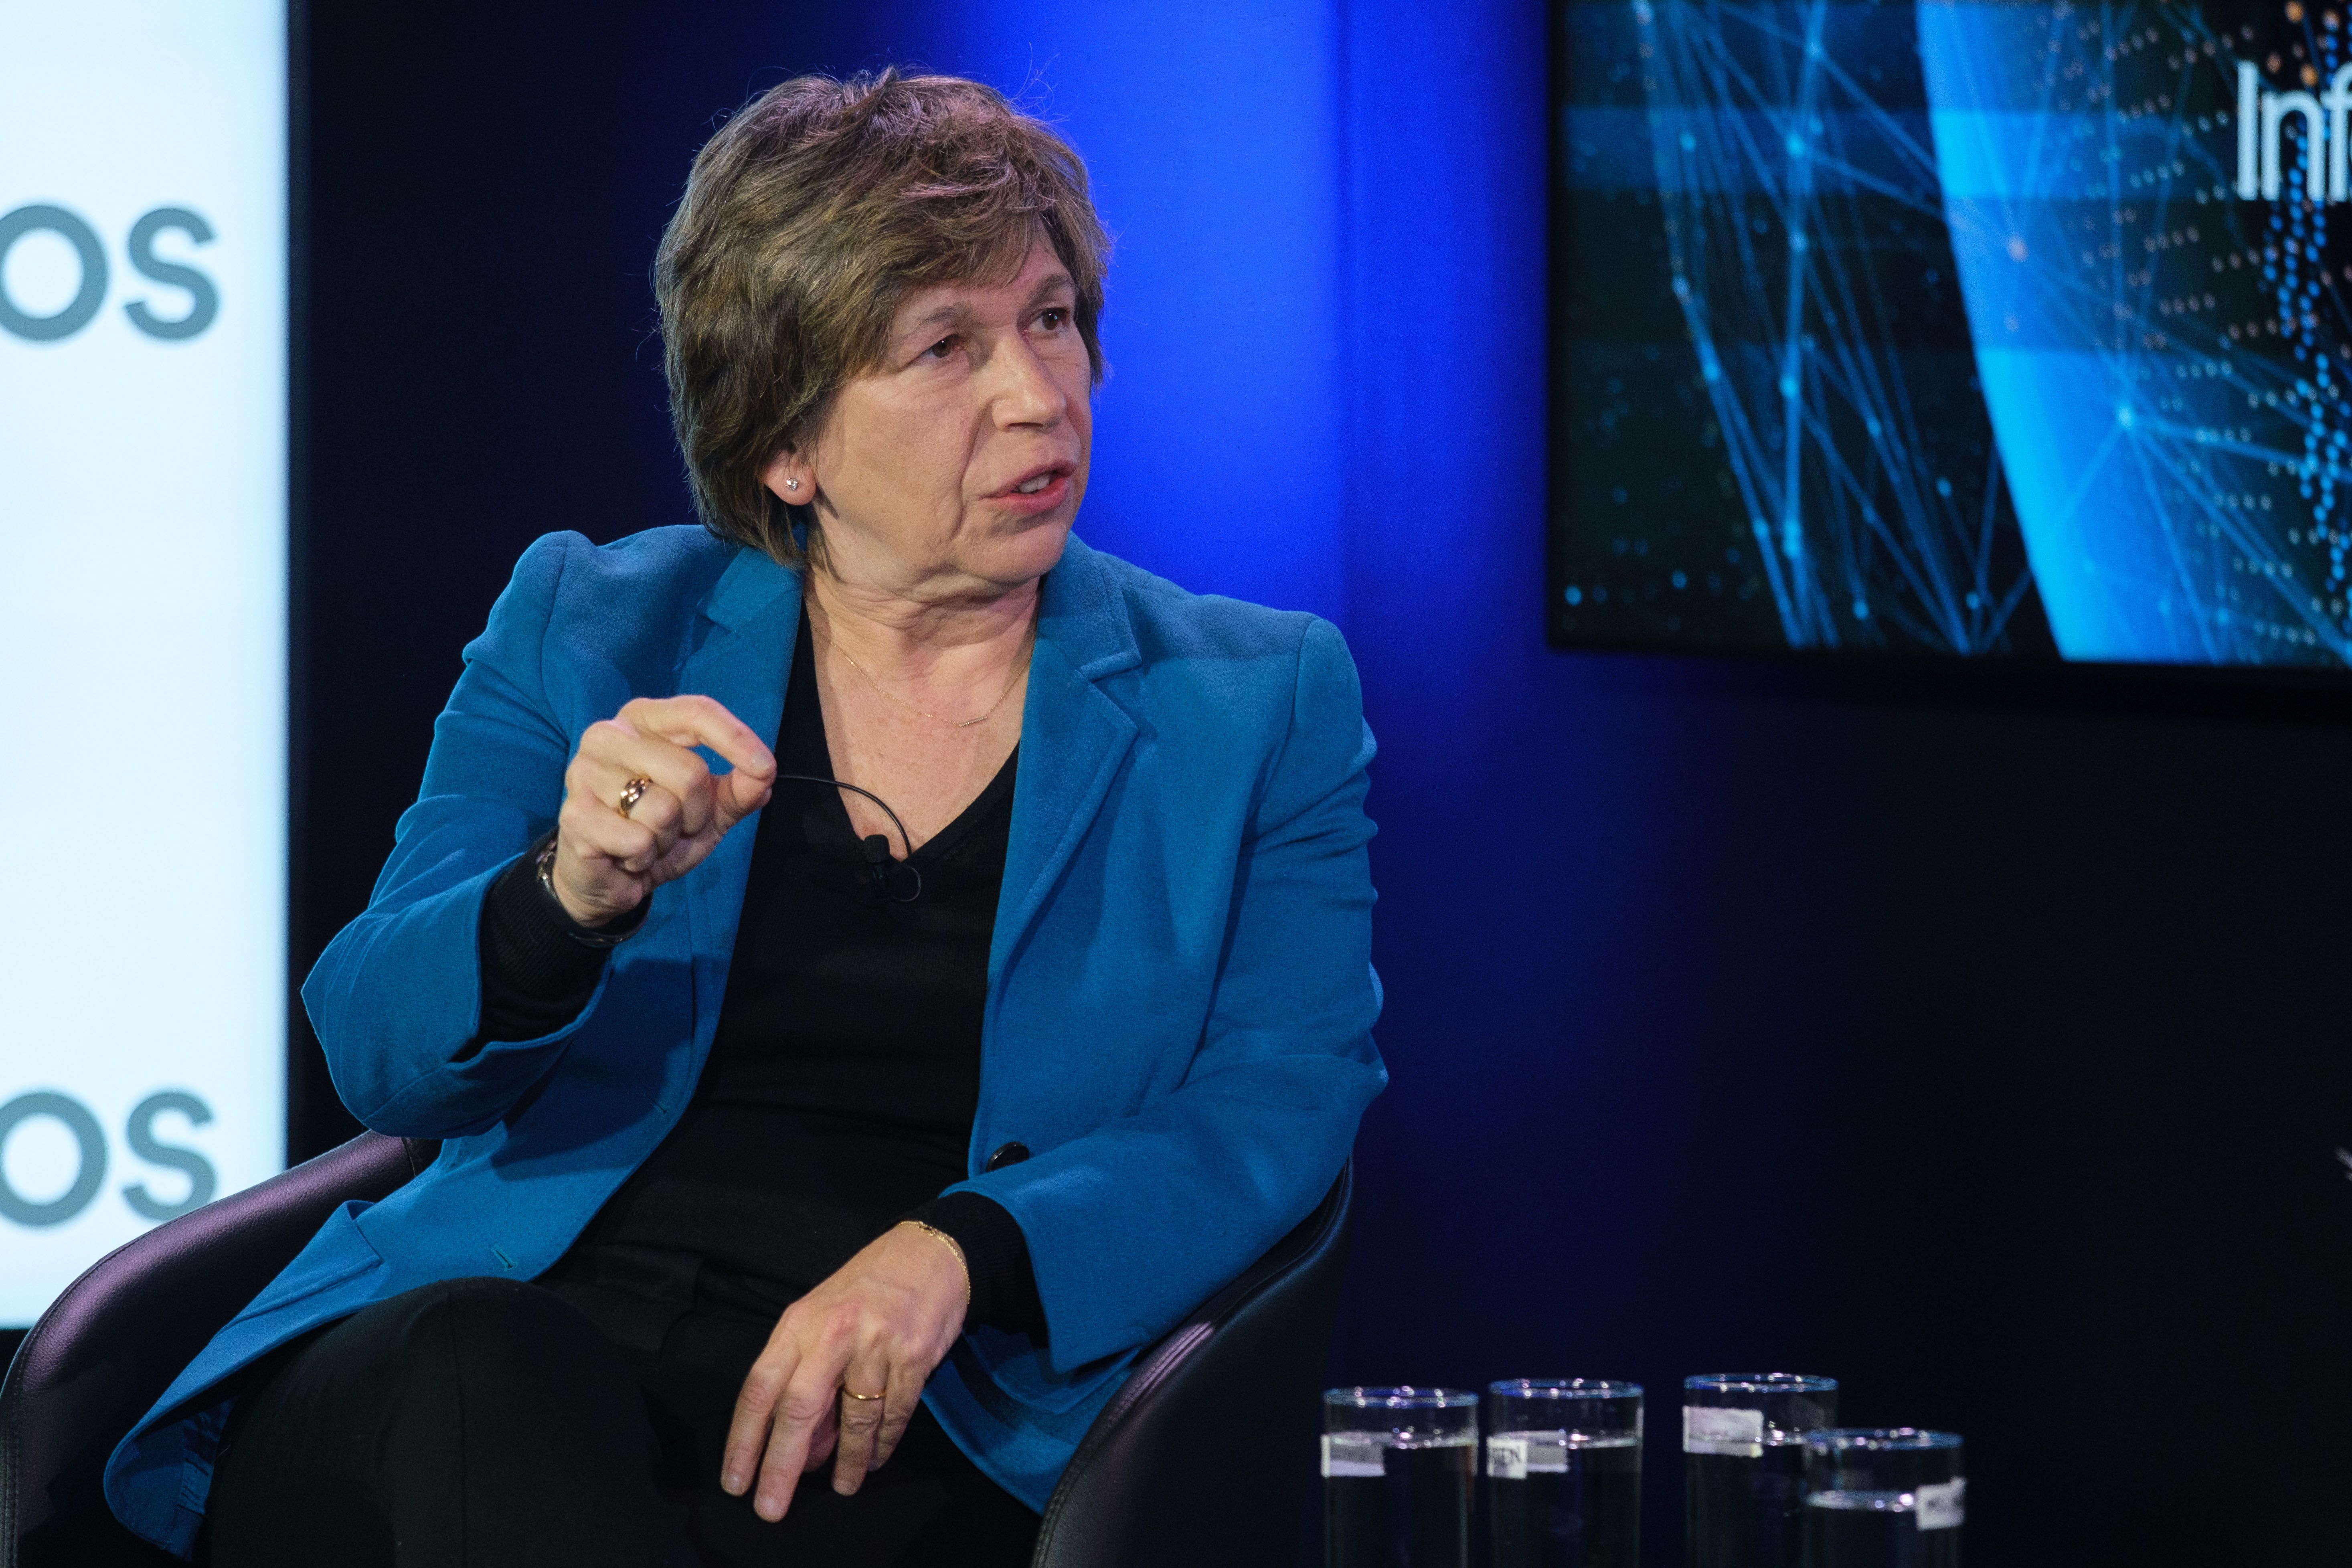 Weingarten on the Axios stage